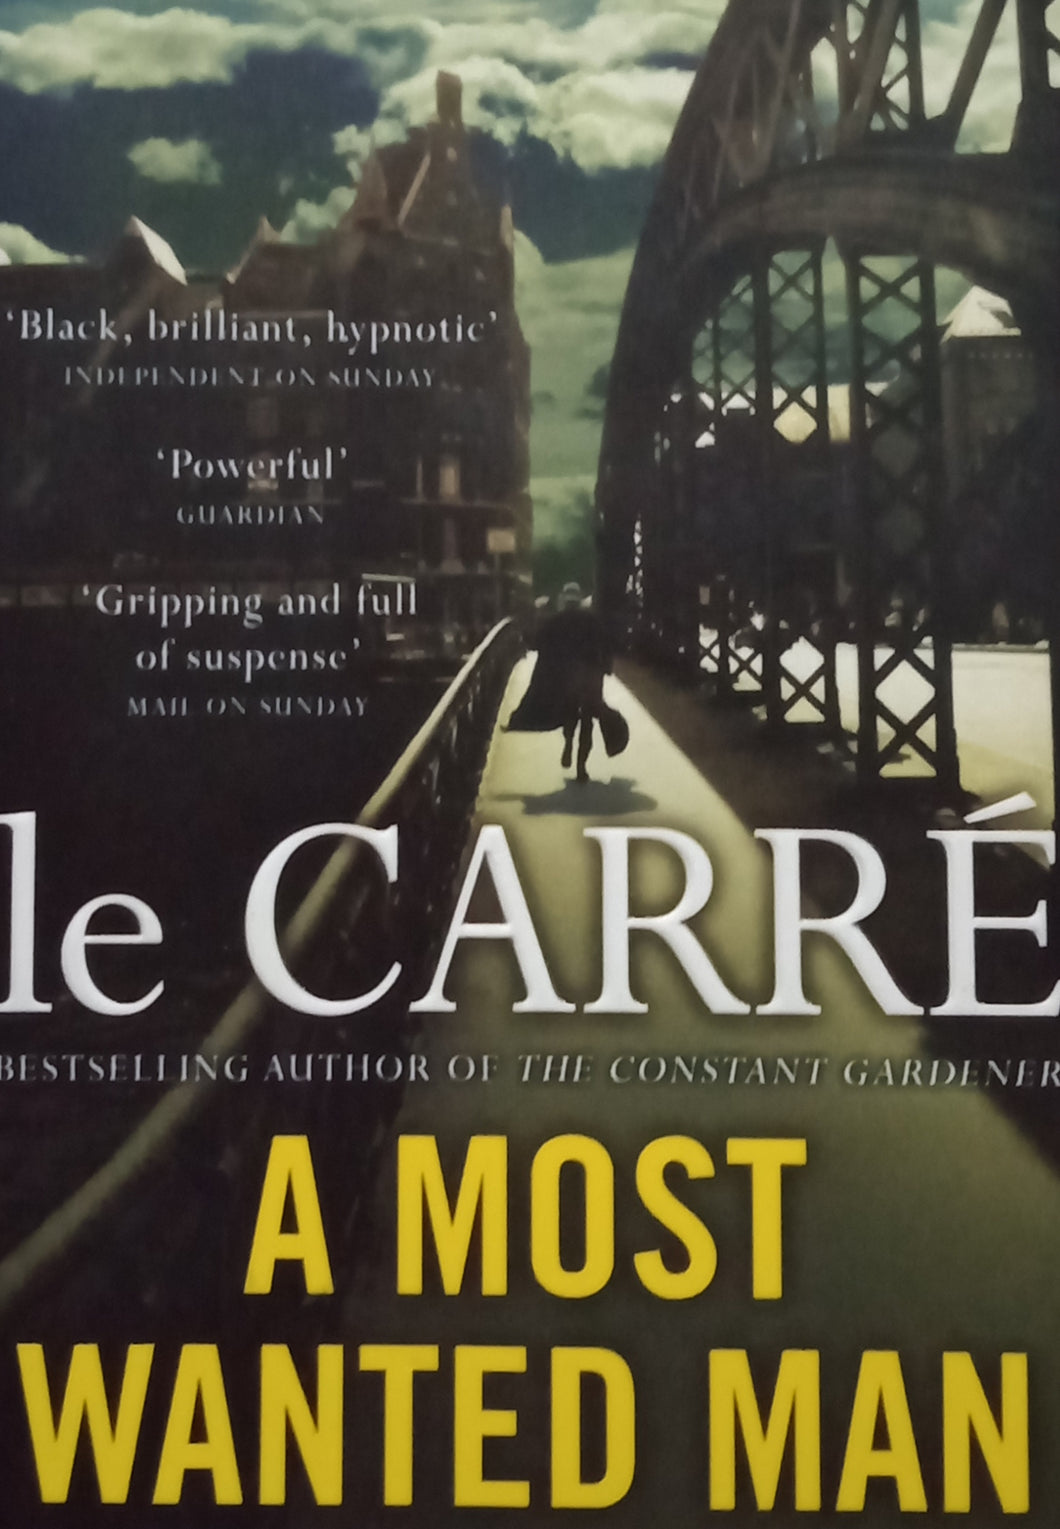 A Most Wanted Man by Le Carre